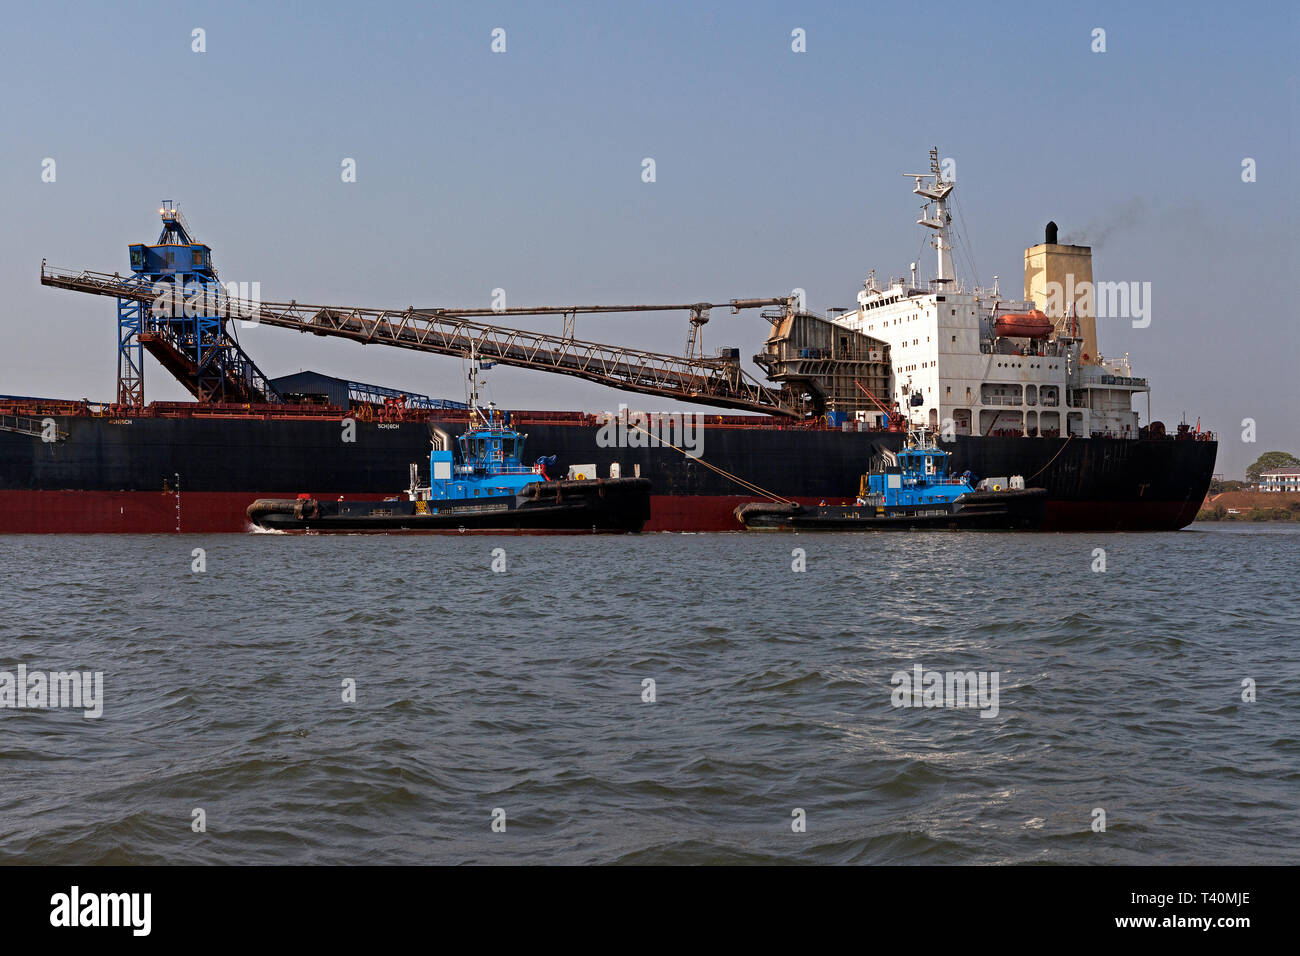 Port operations for managing and transporting iron ore. Transhipping boat and tugs prepare to set sail to unload into OGV - Ocean Going Vessel at sea Stock Photo